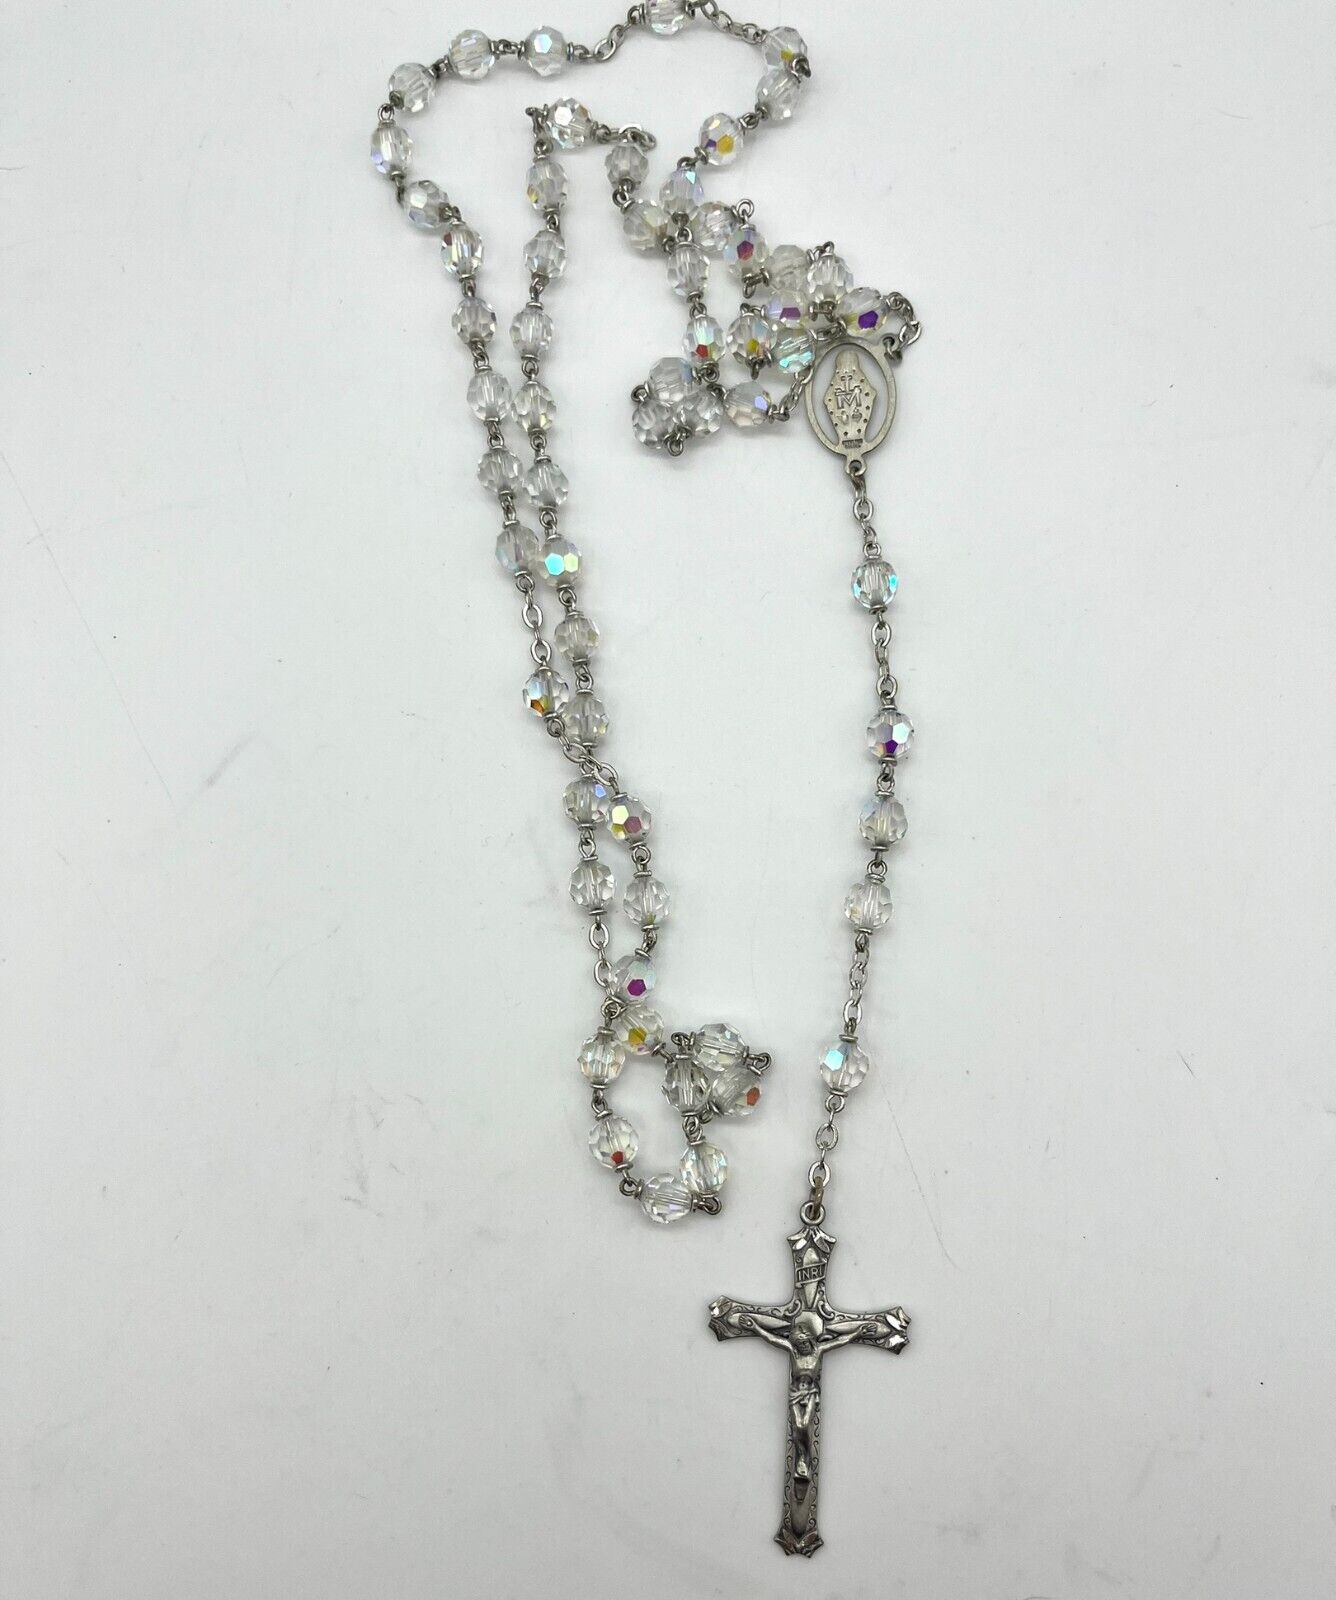 Vintage Chapel Sterling Silver Crystal Beads Crucifix Cross Mary Rosary Necklace